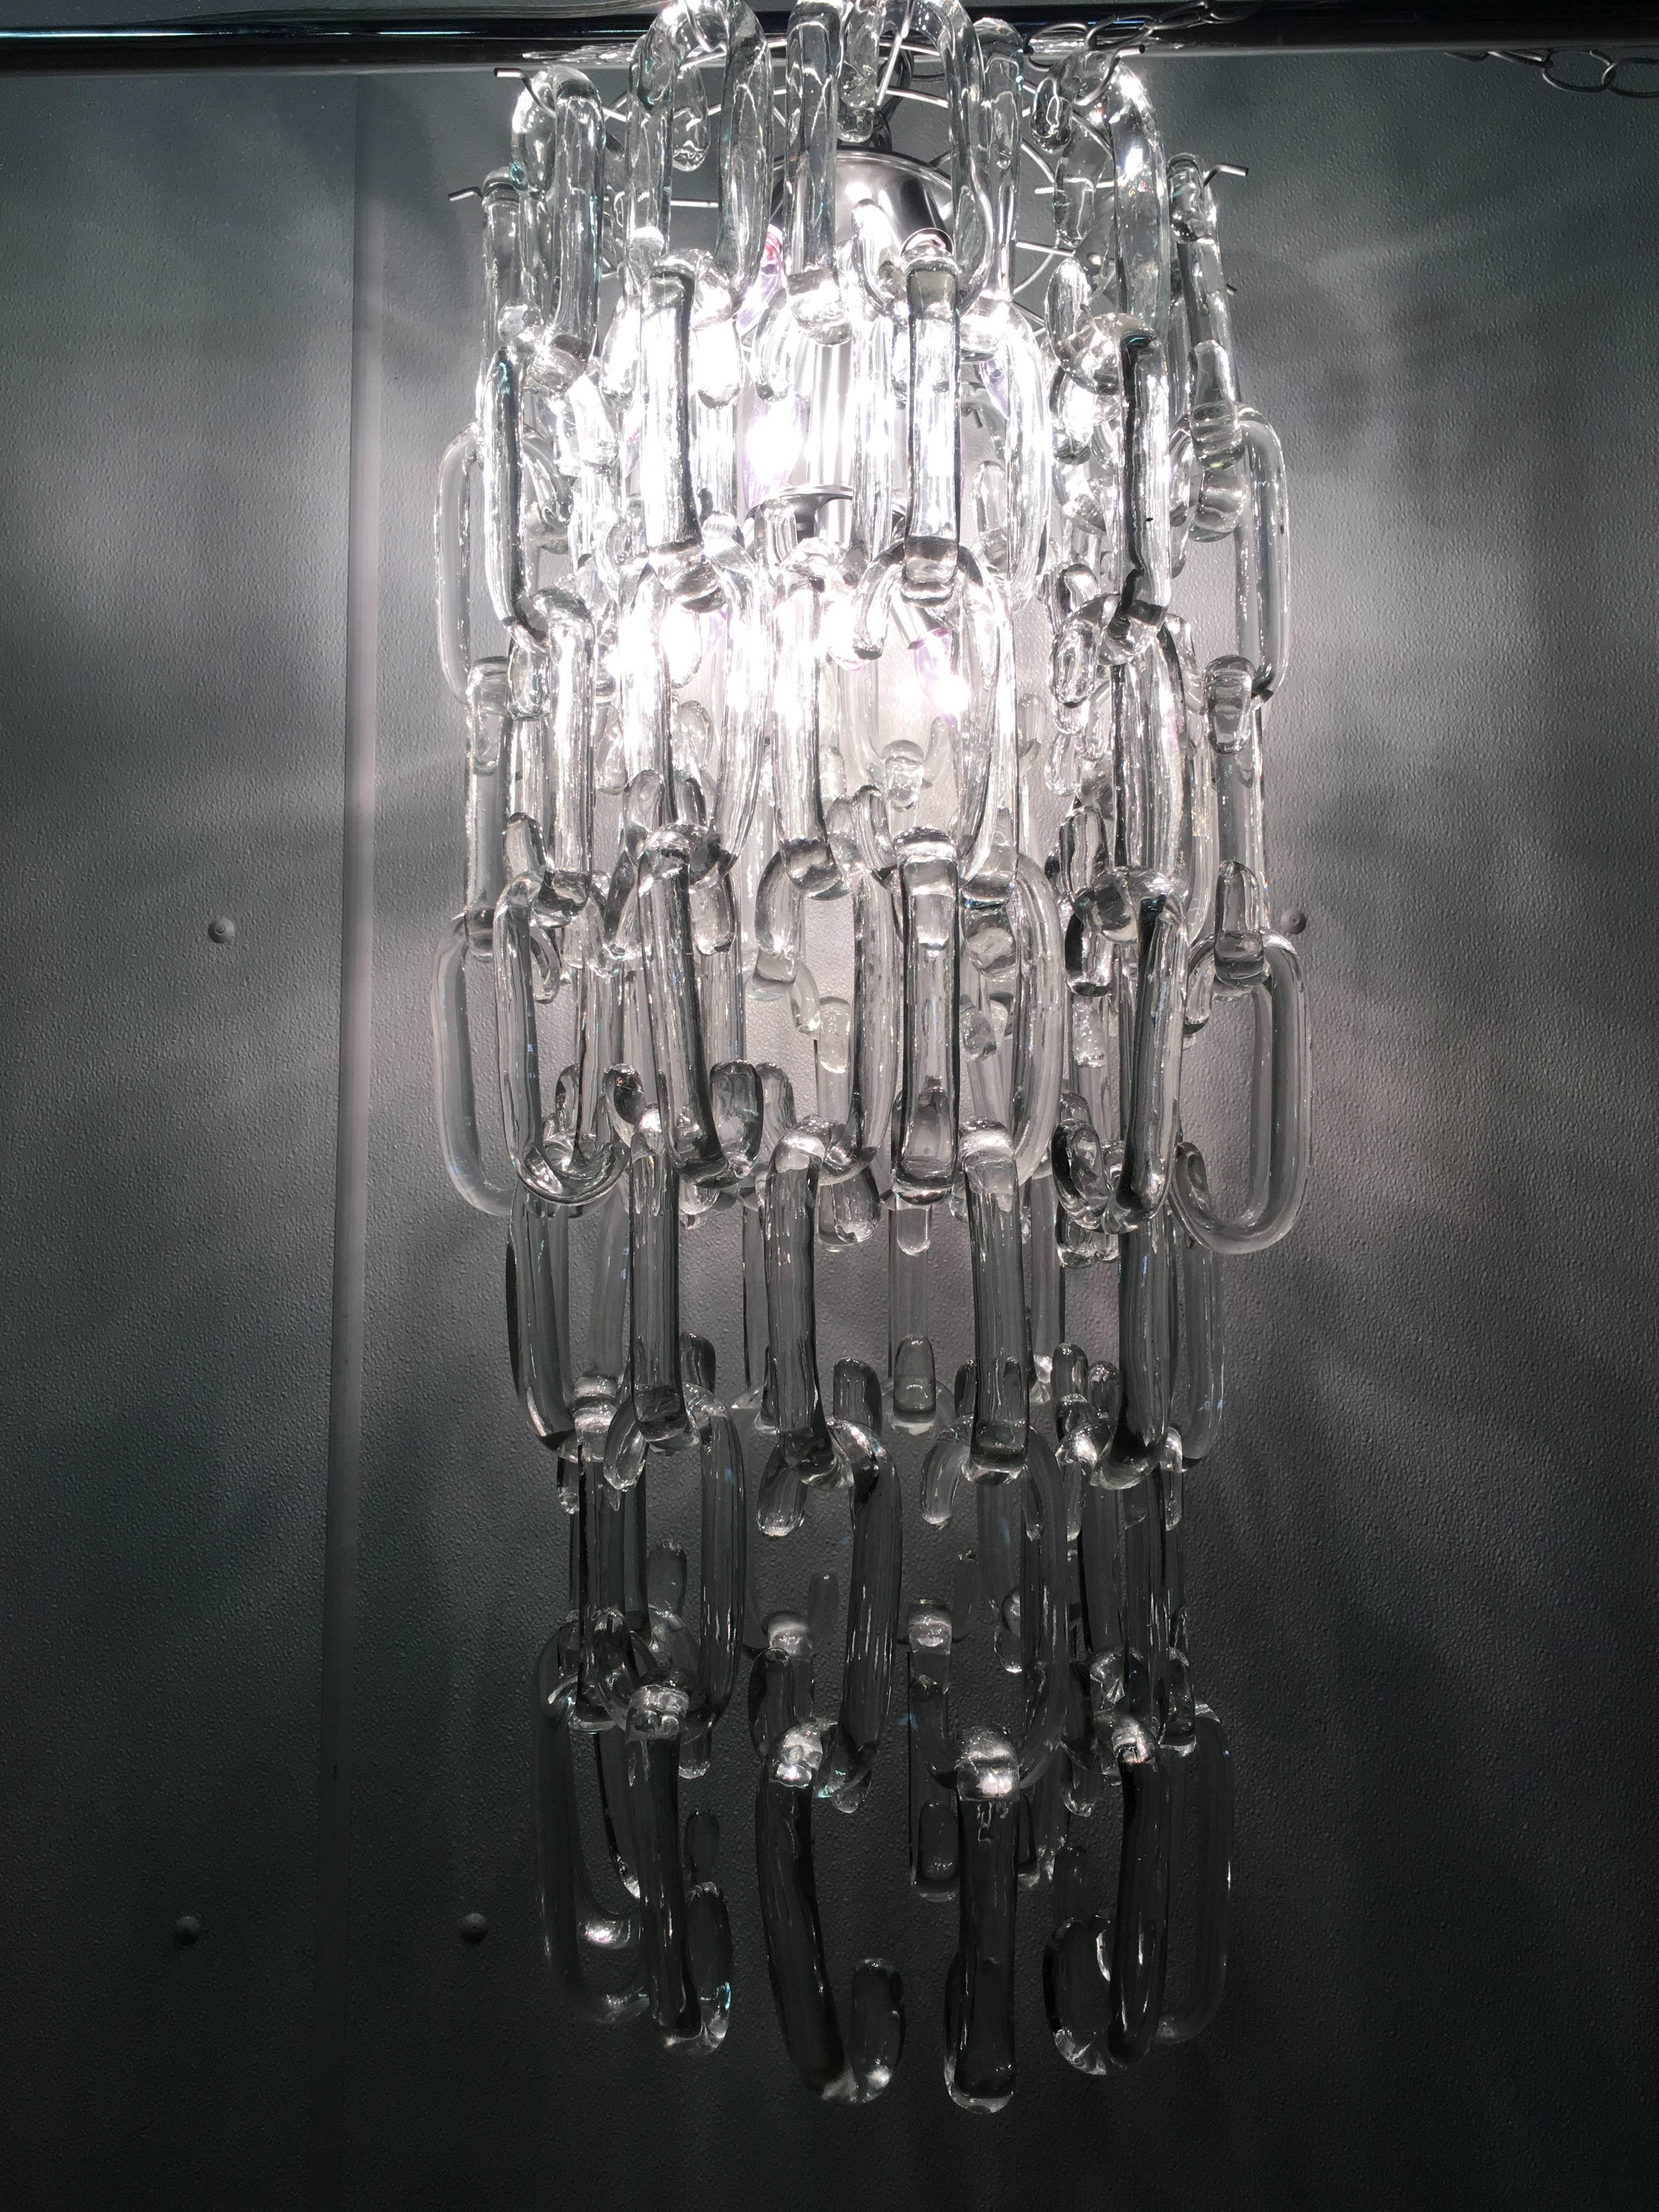 Fabulous cascading Murano glass link chandelier. Chandelier can be adjusted by removing links and to fit a specific space. Each link measures 6" H. As shown the chandelier measures 35" H x 15.25" W. Ten light sockets.U